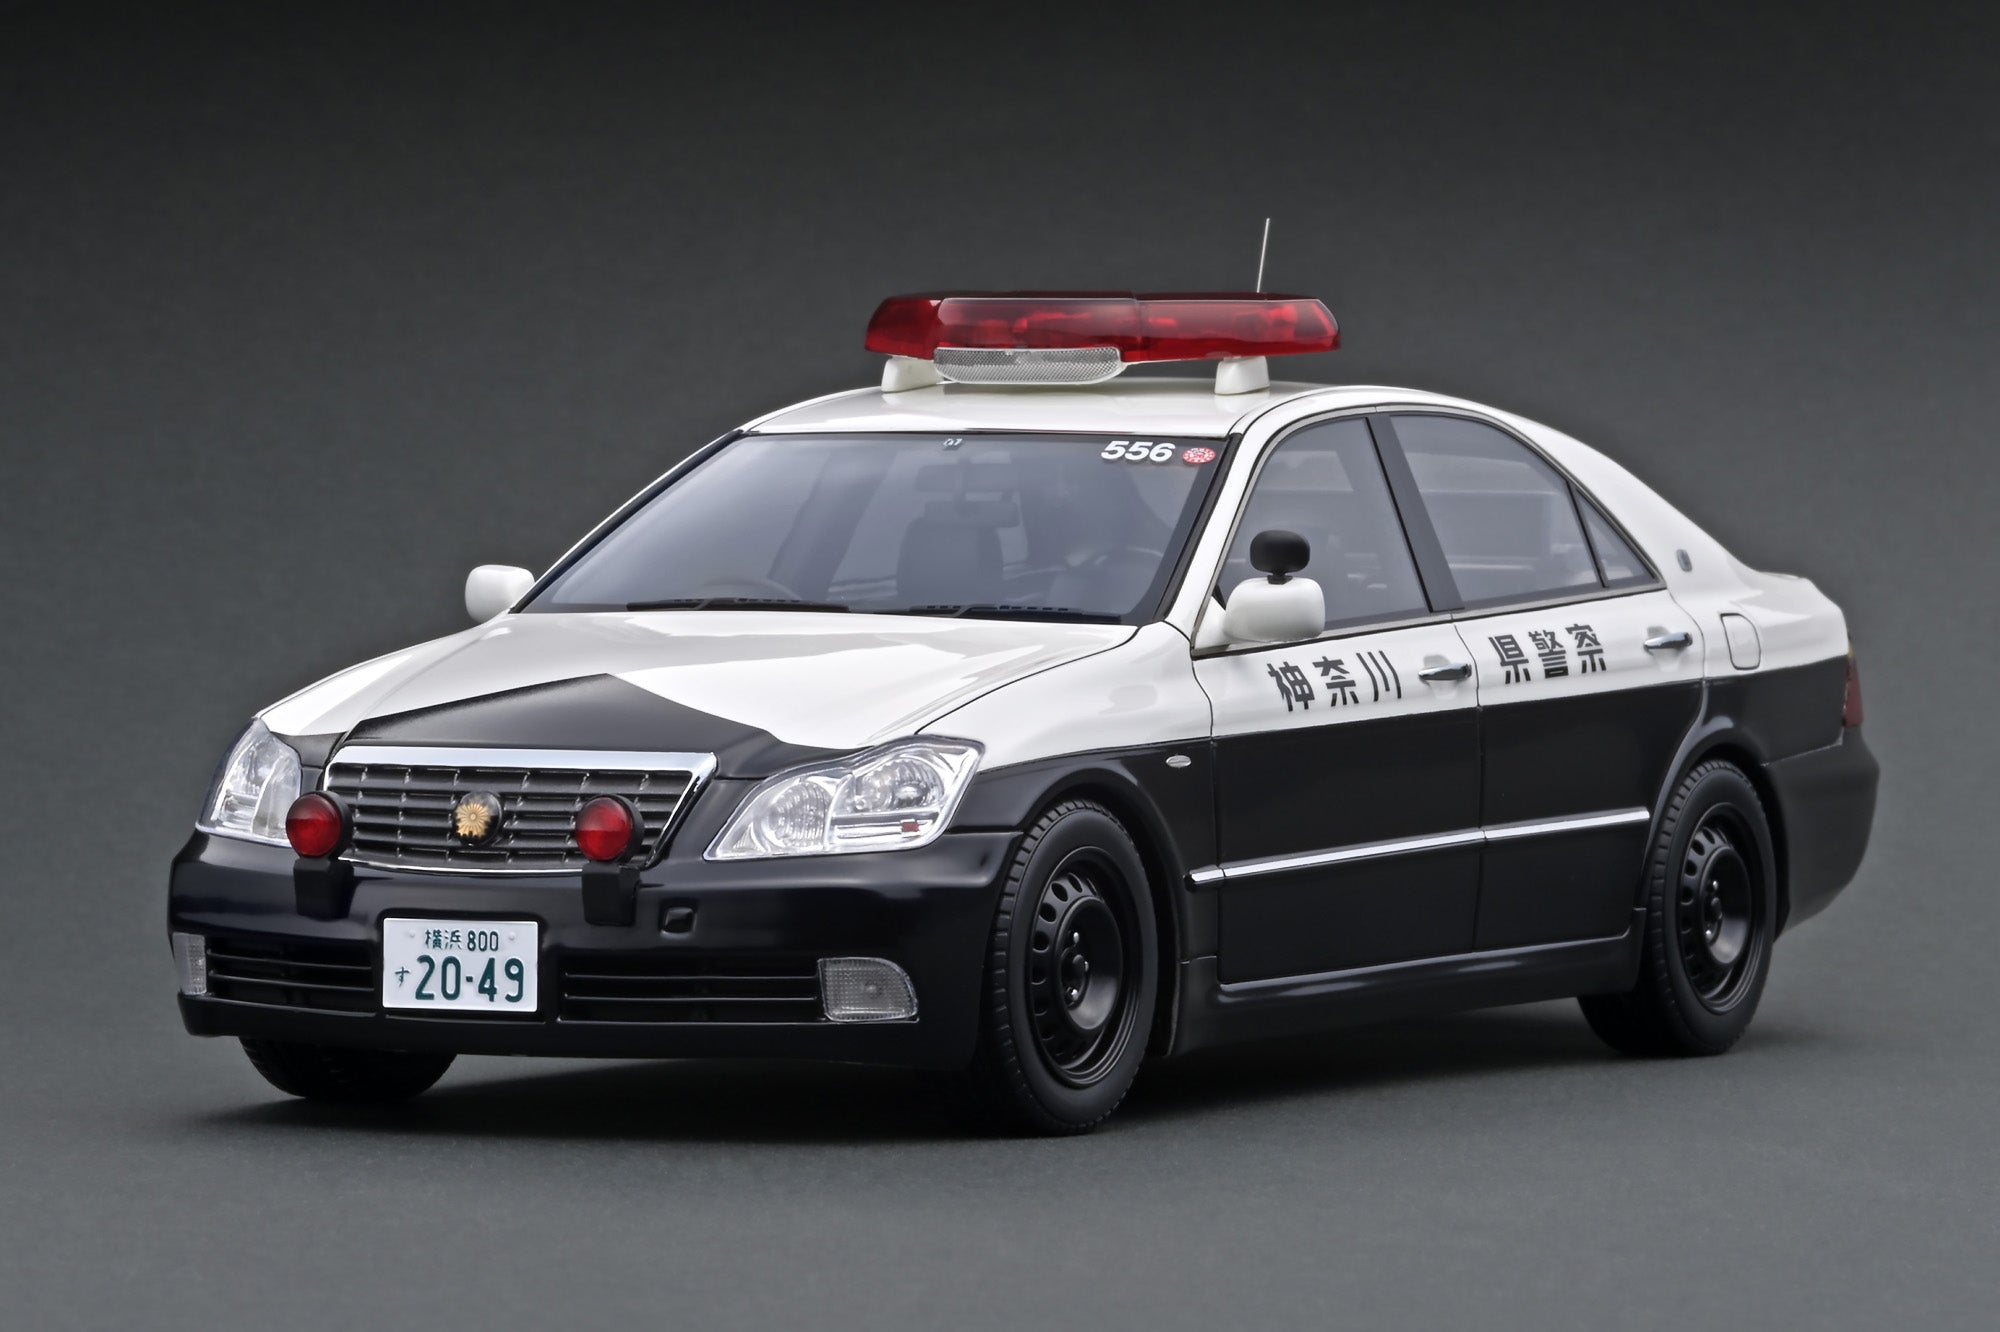 ignition model 1/43 トヨタ Crown (GRS180) 神奈川県警高速道路 交通